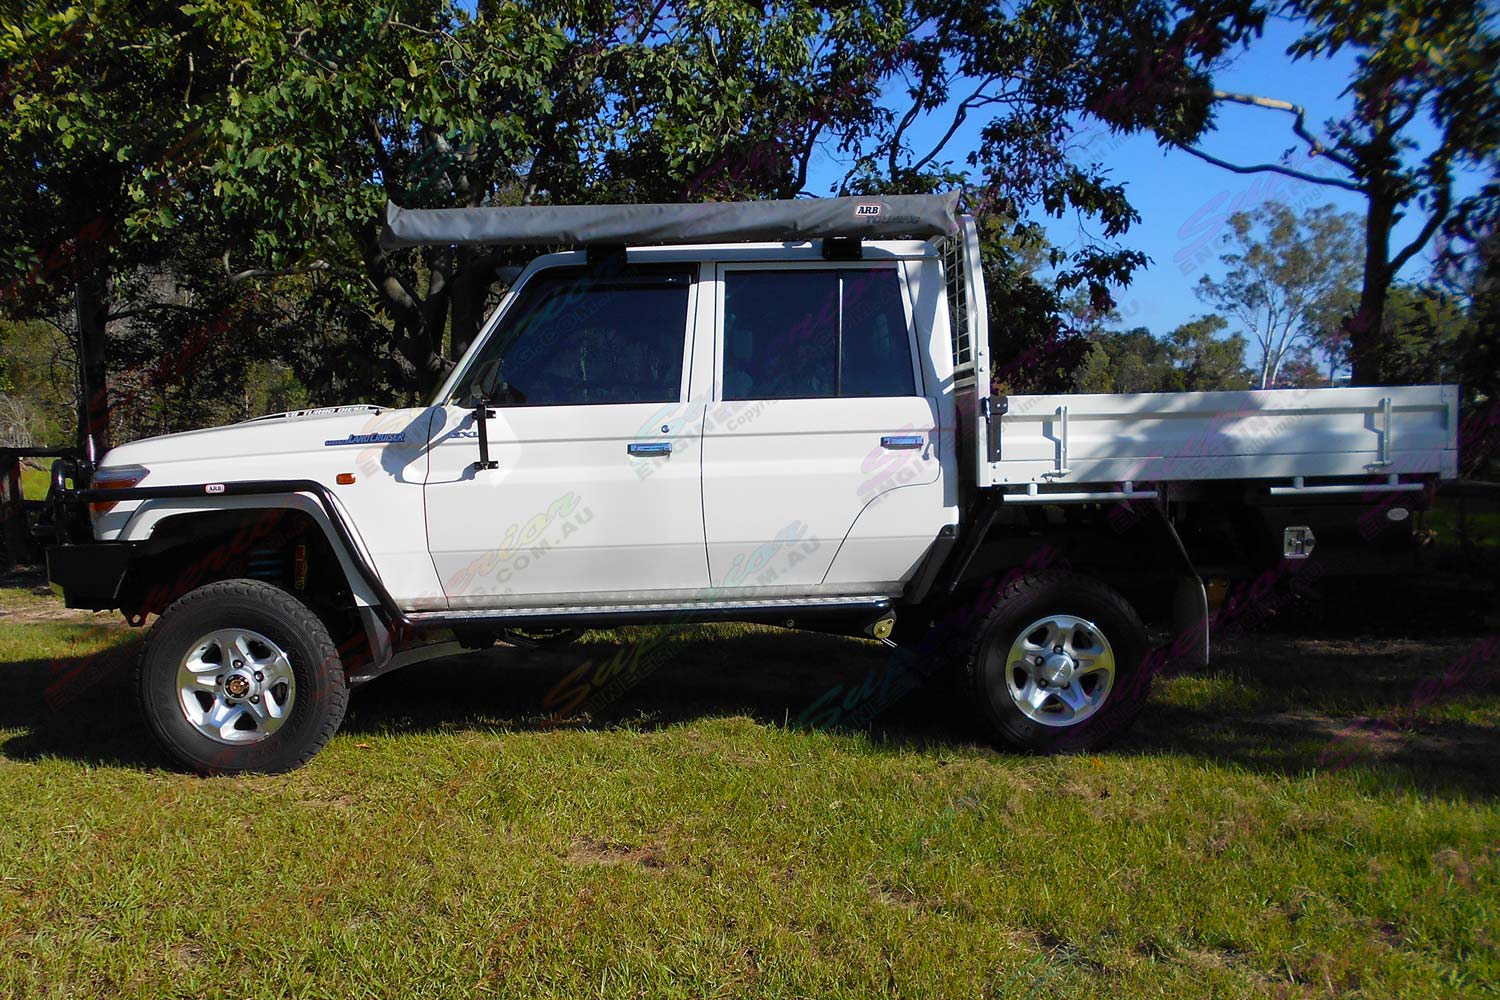 Left side view of a 79 Series Toyota Landcruiser dual cab fitted with a heavy duty Superior 4 Inch Dropped Radius Arm Lift Kit